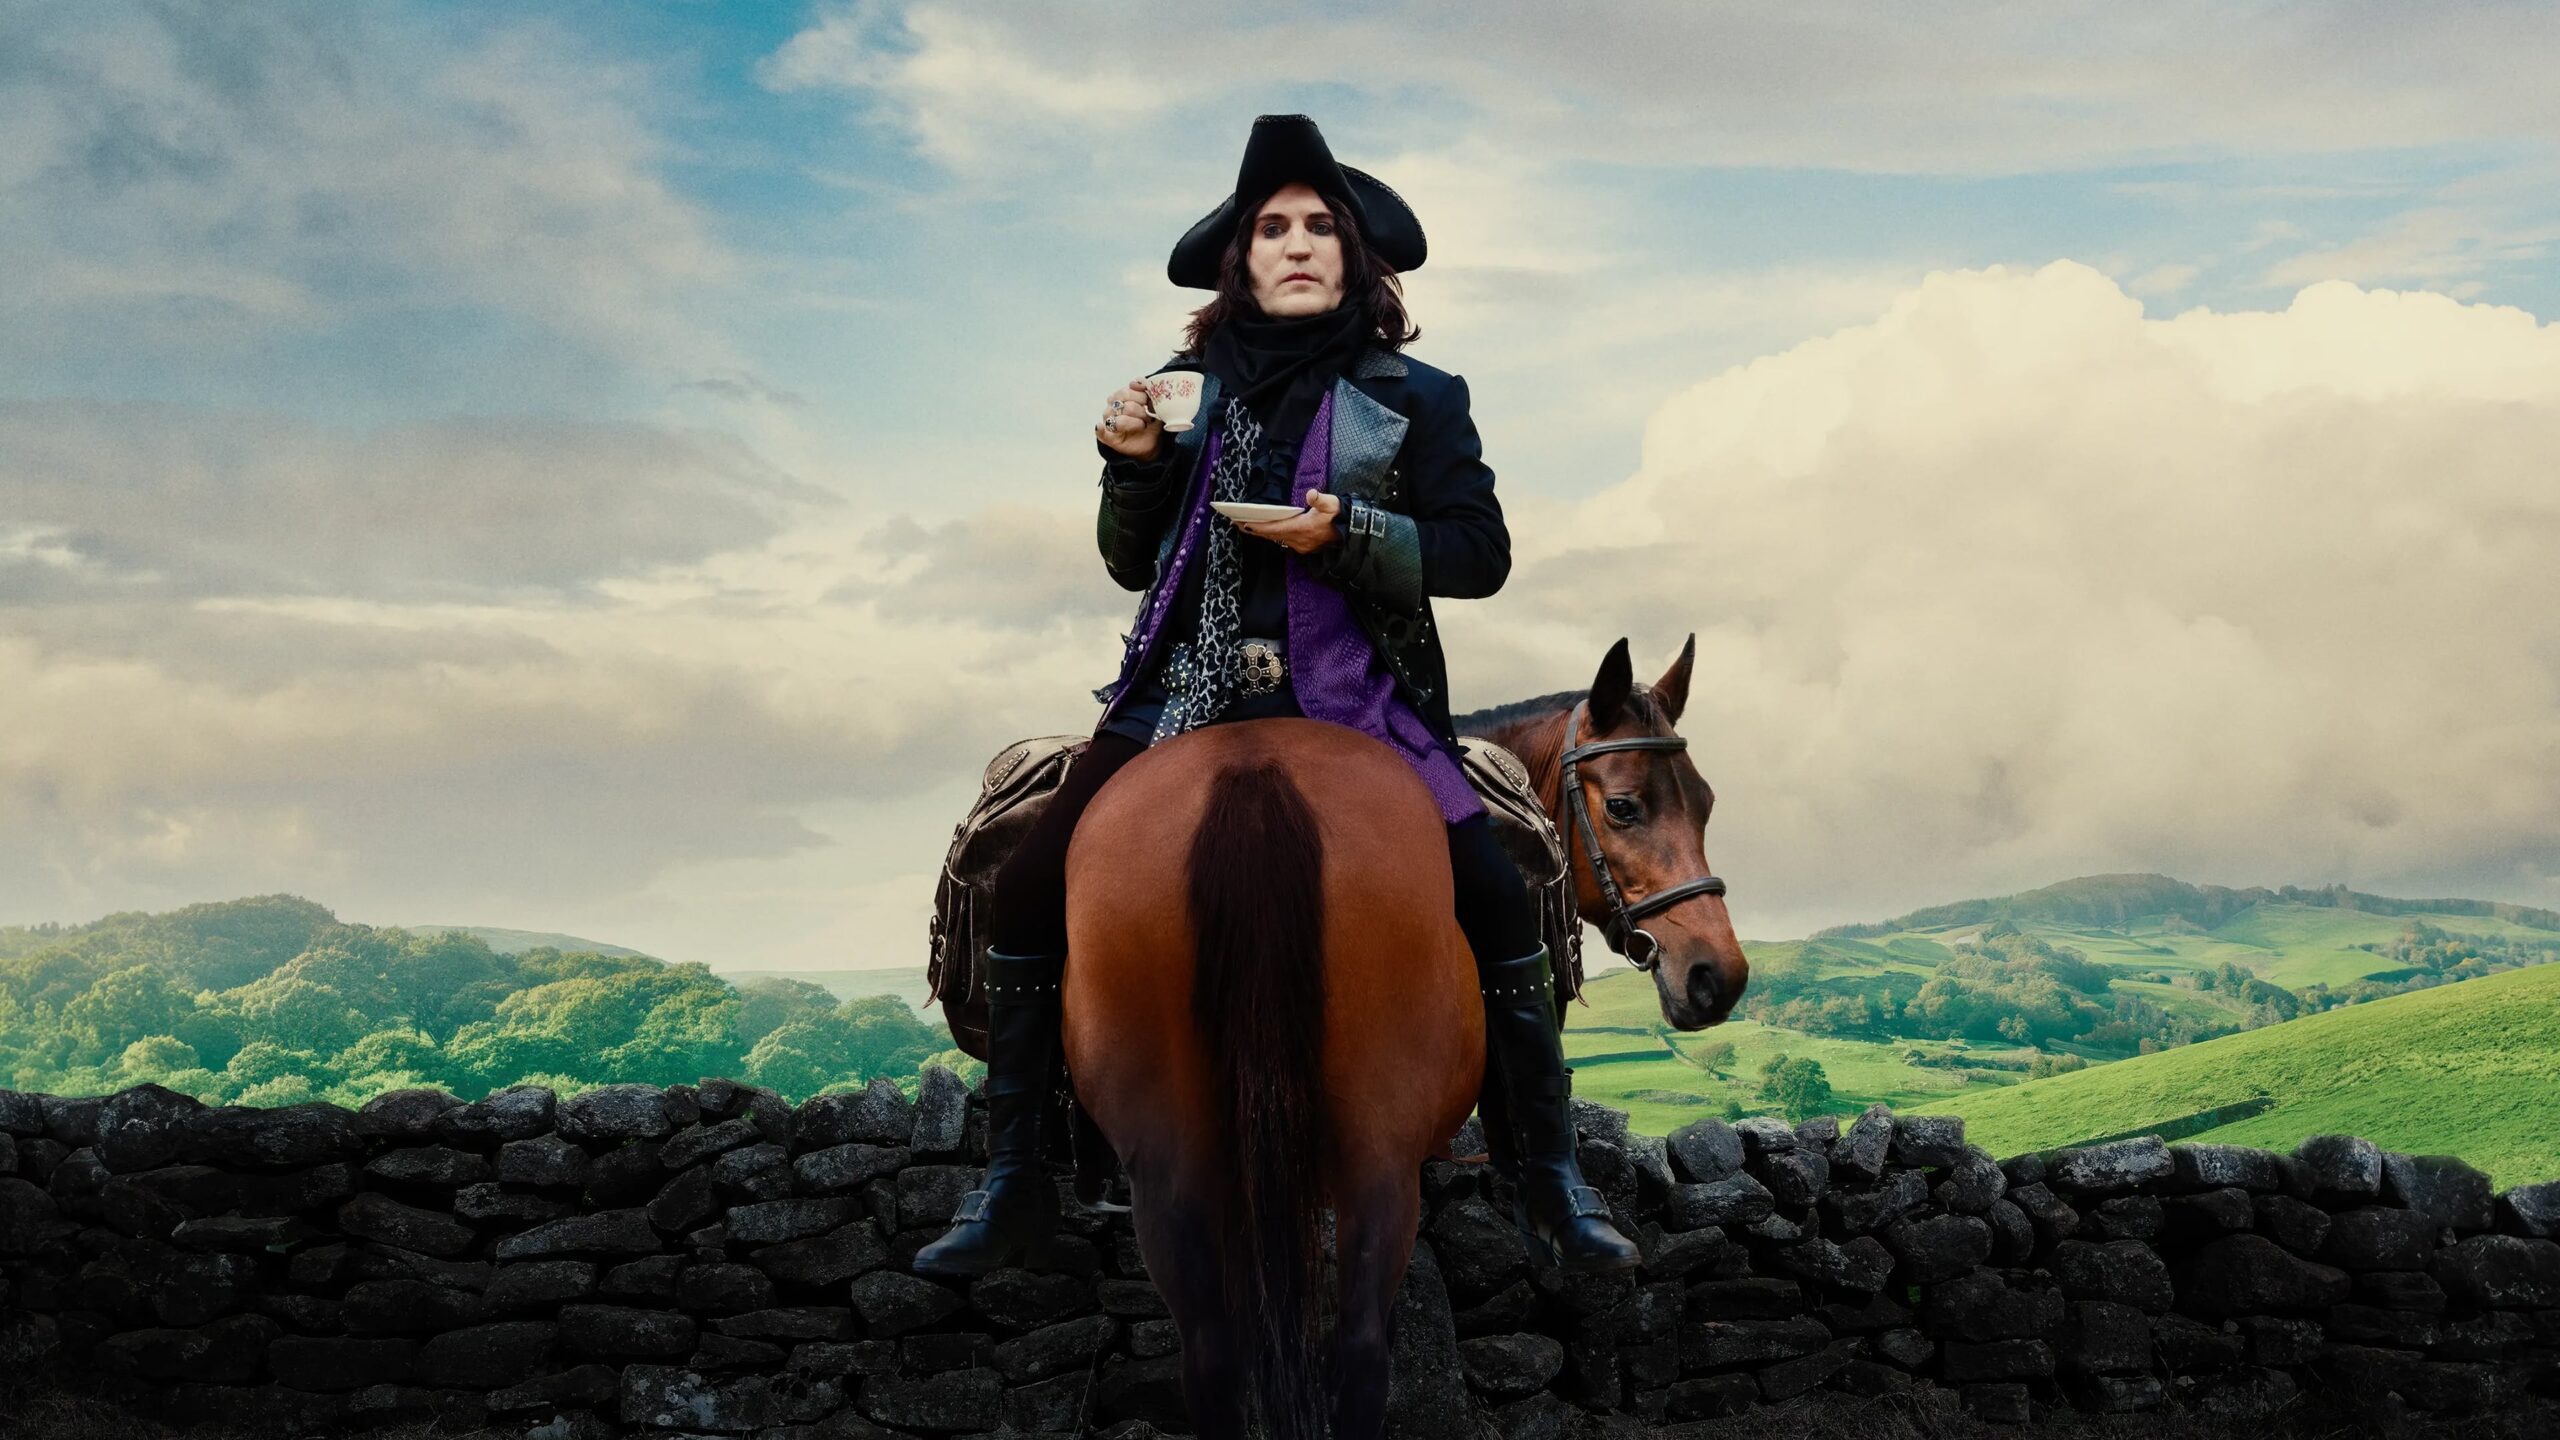 The Completely Made-Up Adventures of Dick Turpin season 1